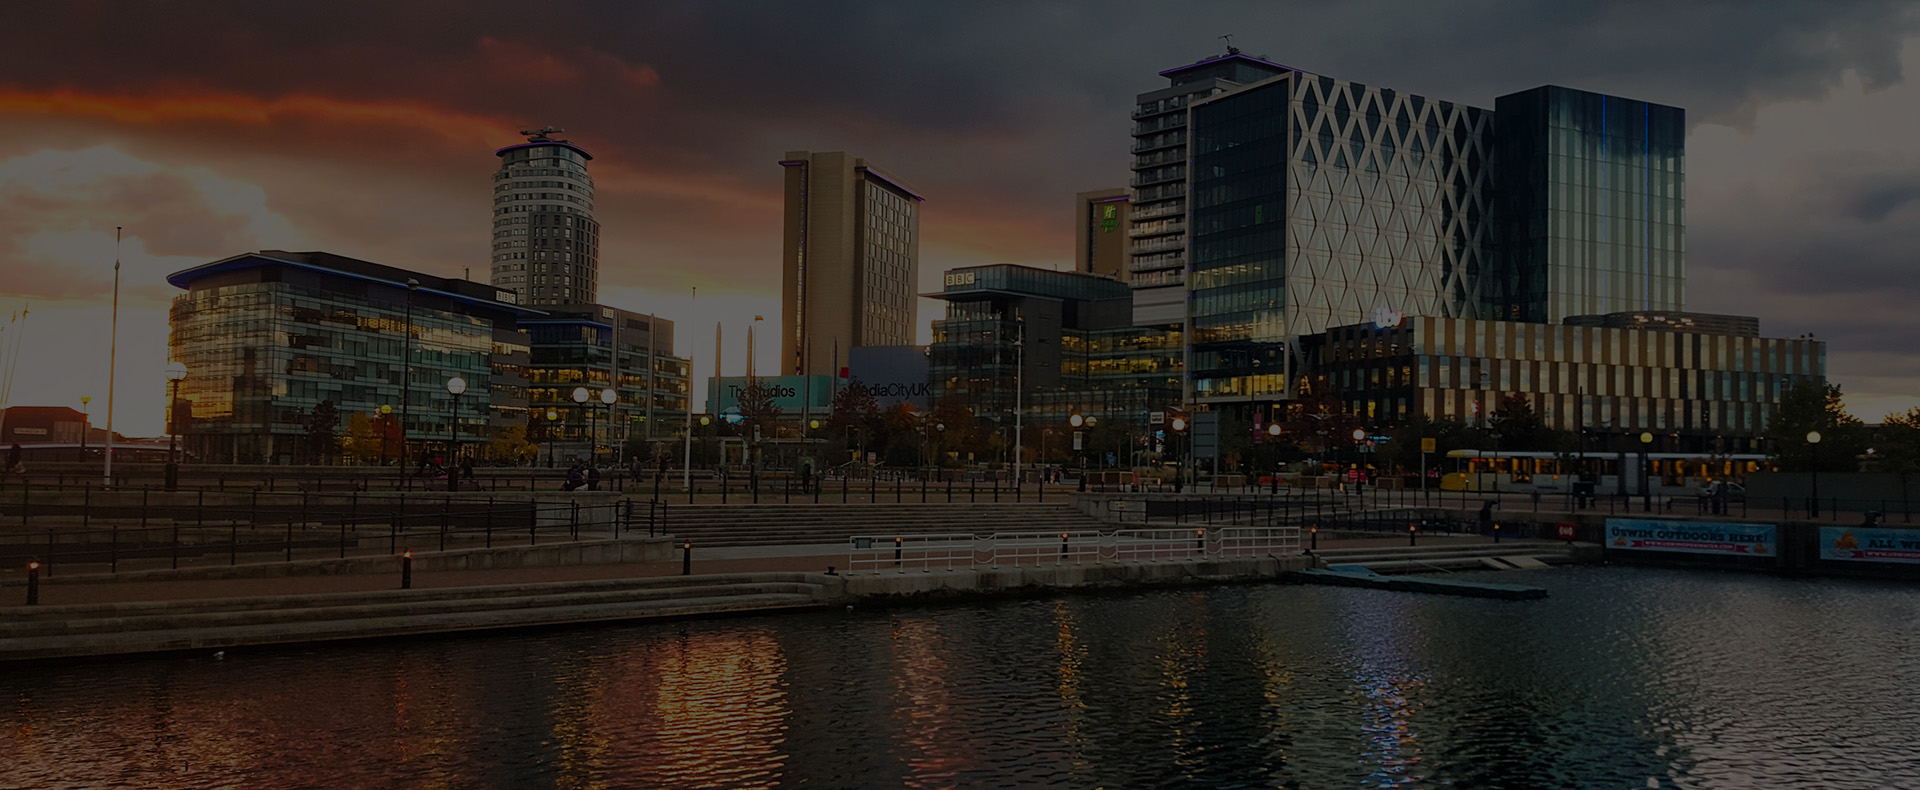 Media City on Salford quats, several tall metal buildings with water infront at dusk